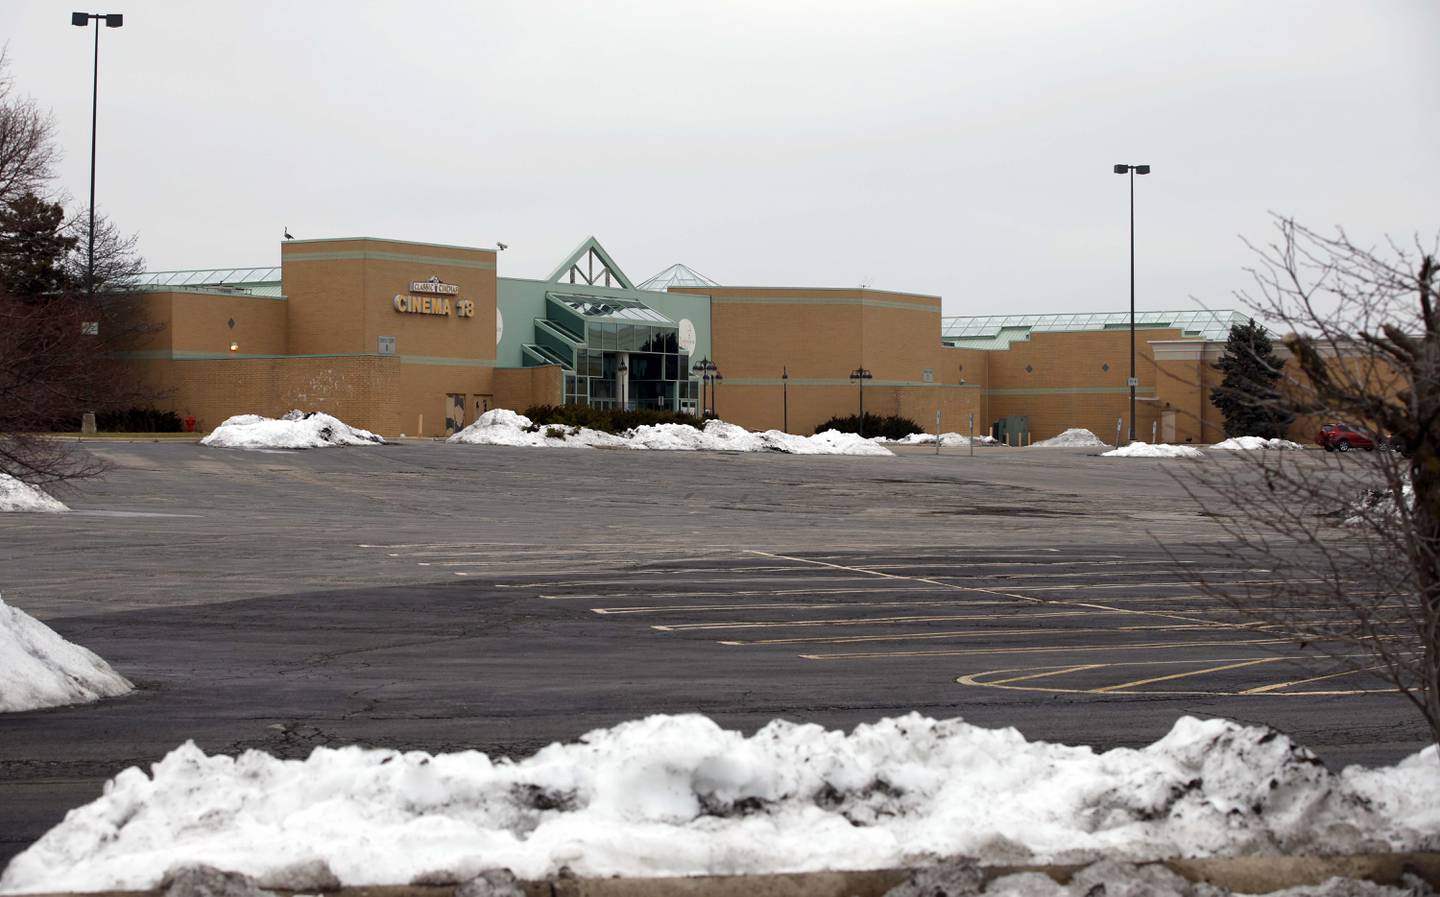 Charlestowne Mall’s two remaining tenants, Classic Cinemas and Von Maur, wish to remain in their buildings.